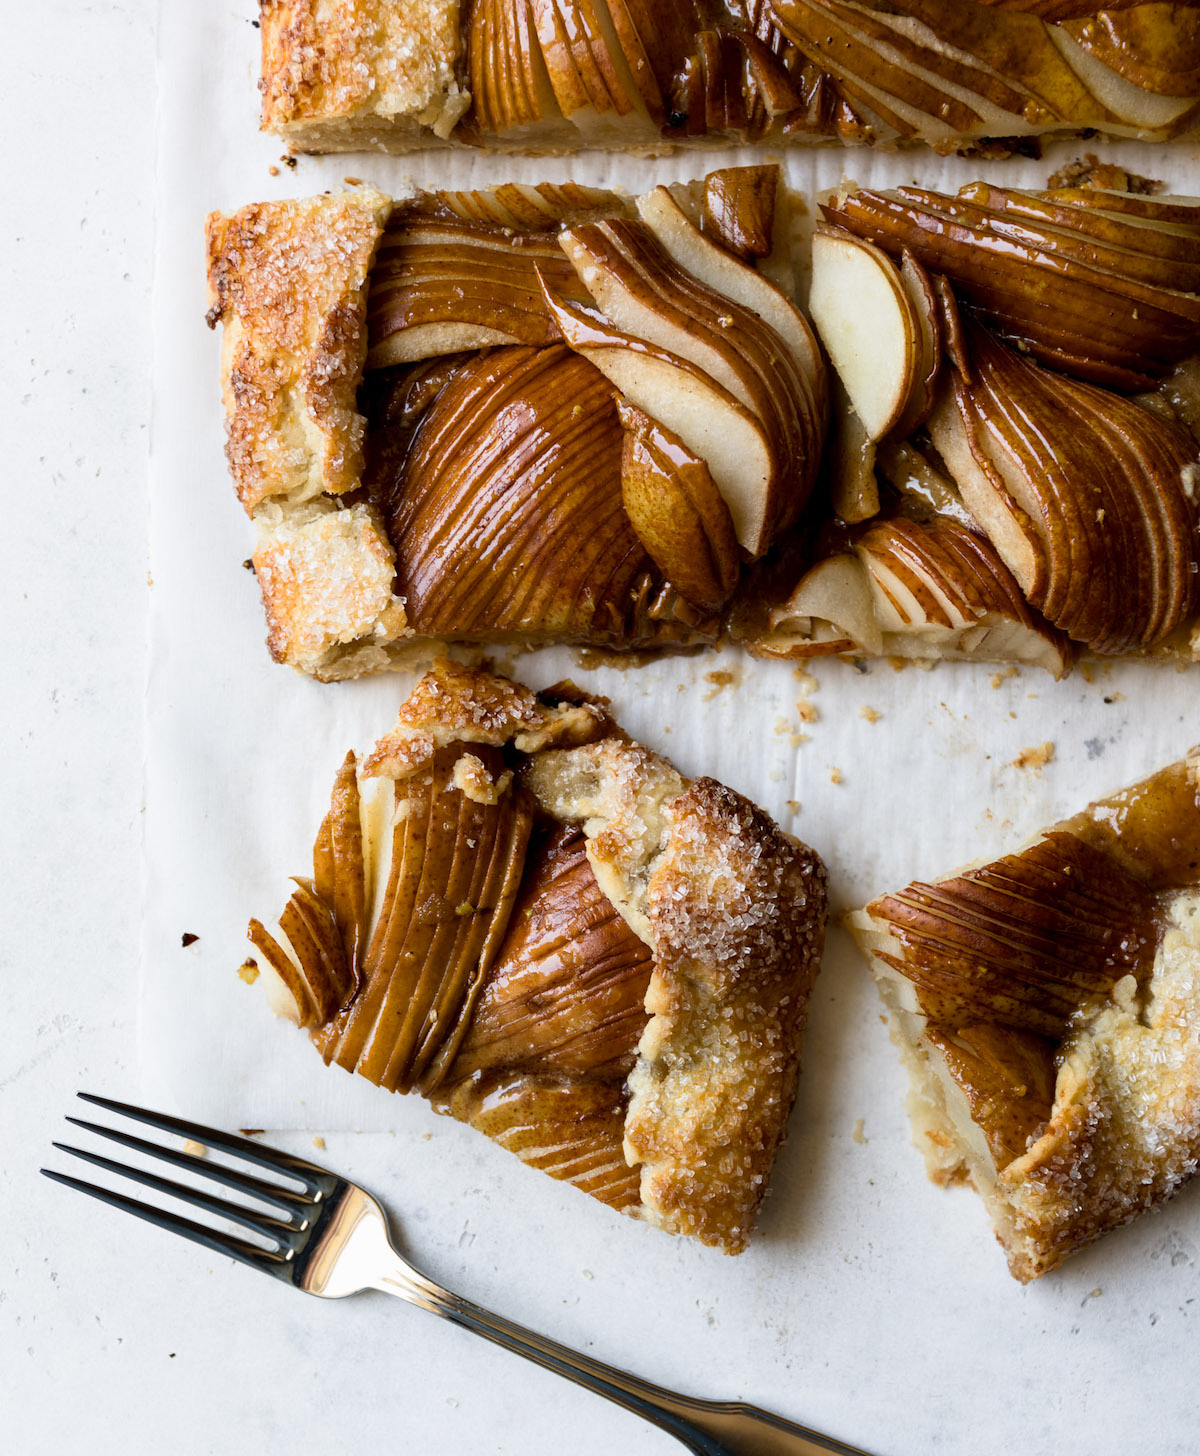 Pear crostata on a white surface.